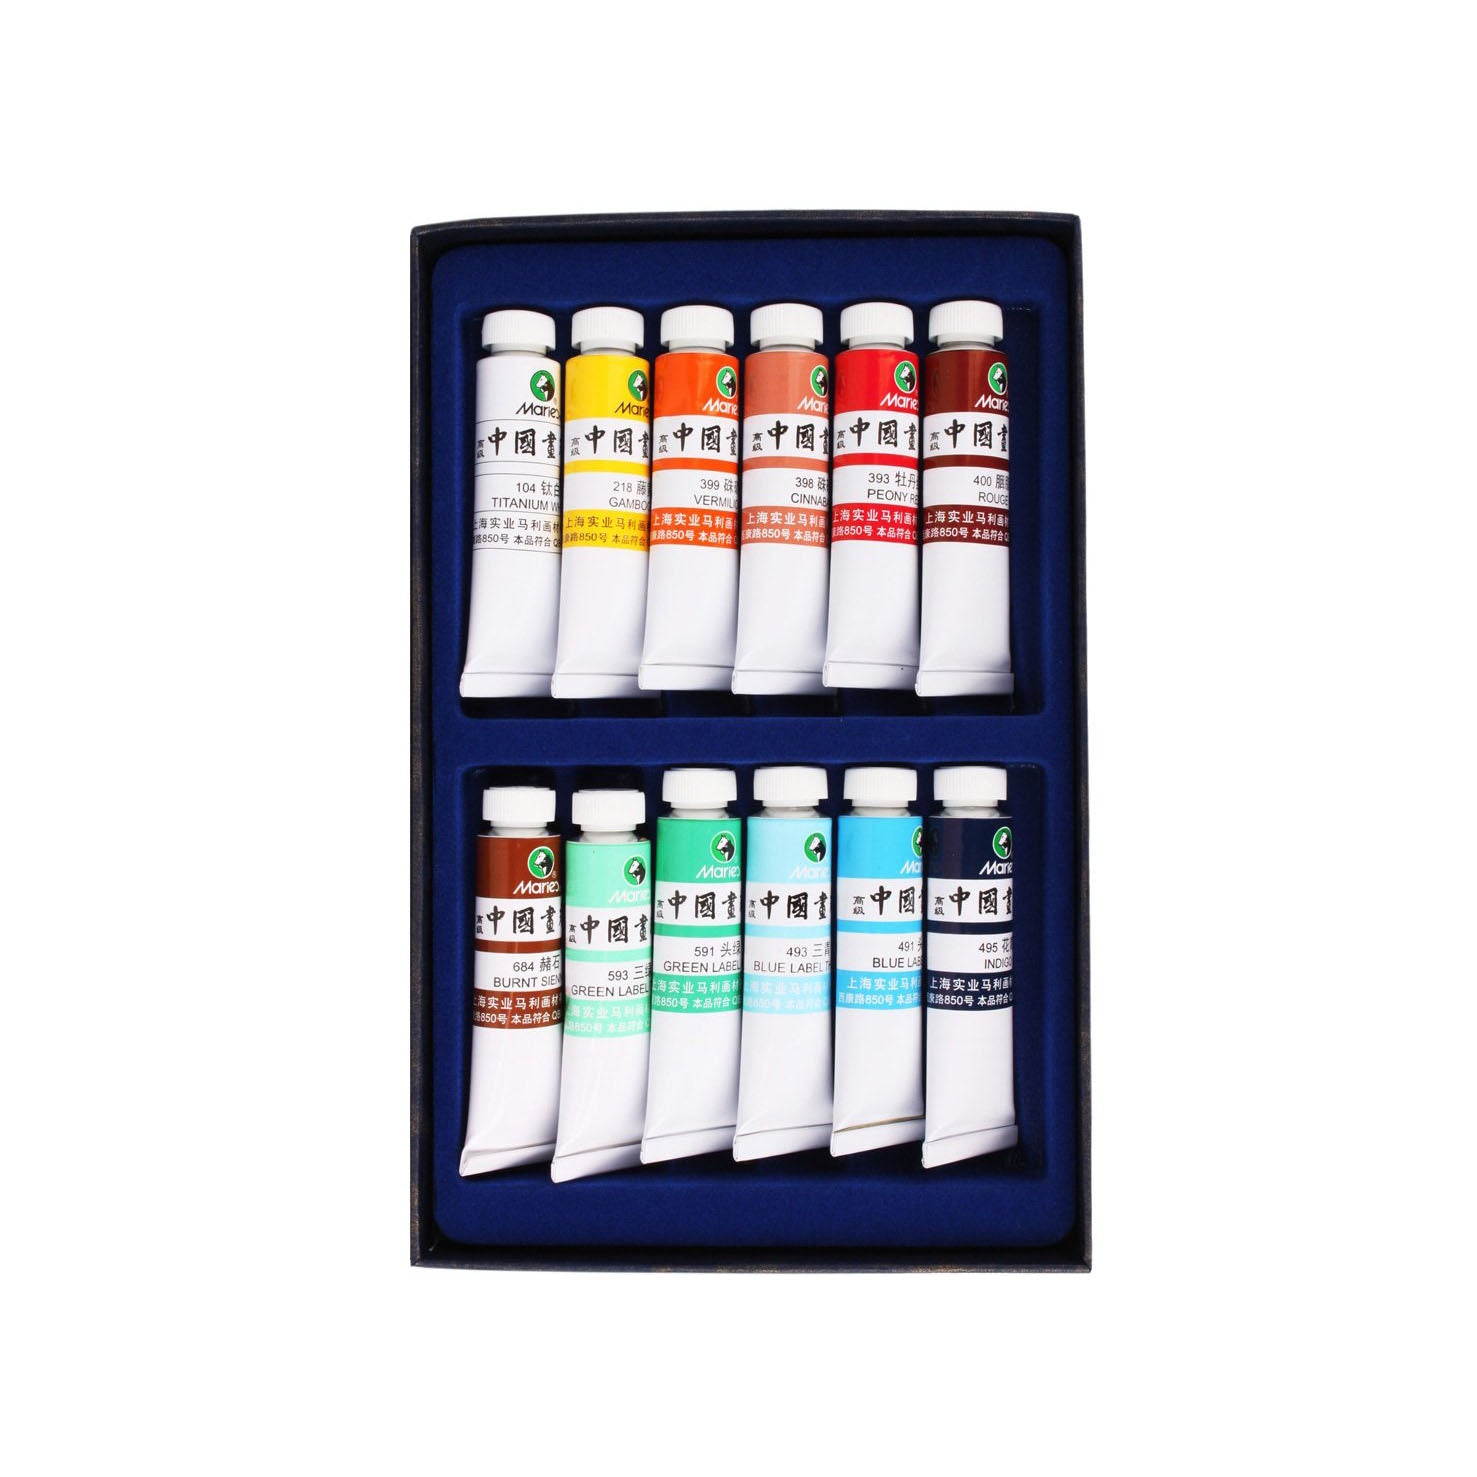 Premium Sumi-e Colors for calligraphy Writing, Sumi-e and Fineline Painting